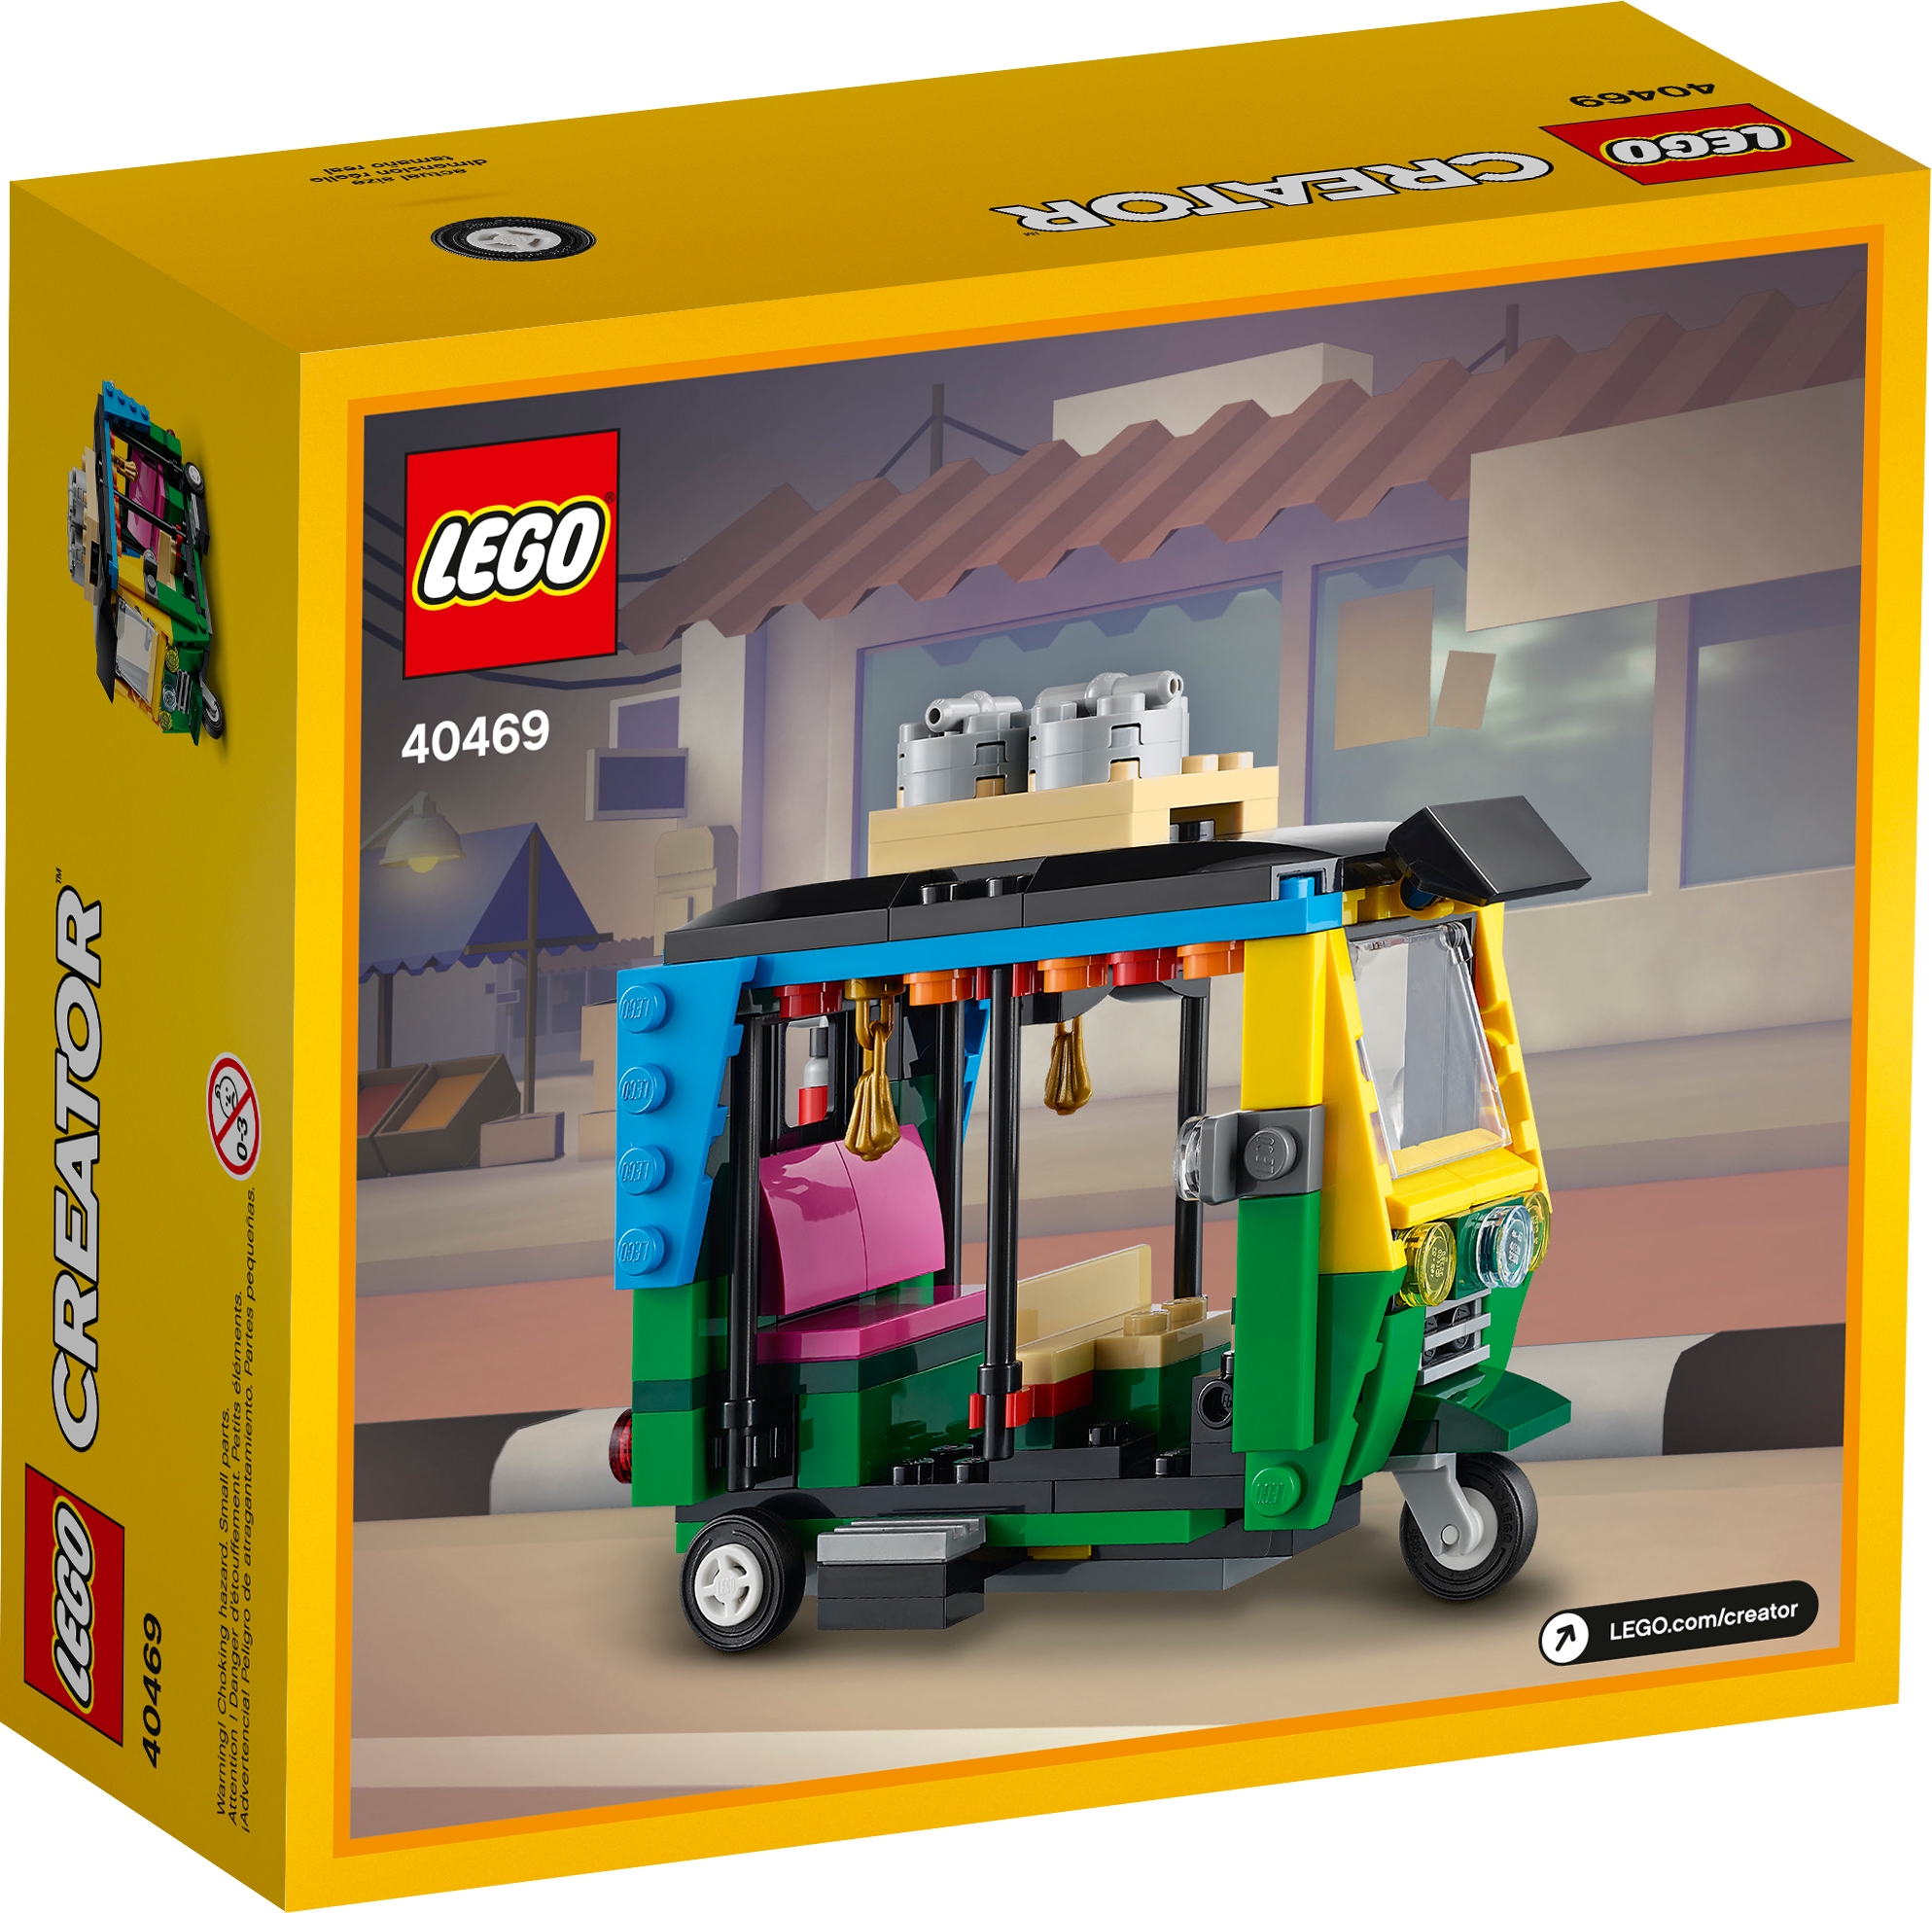 Tuk Tuk 40469 | online at the Official LEGO® Shop US